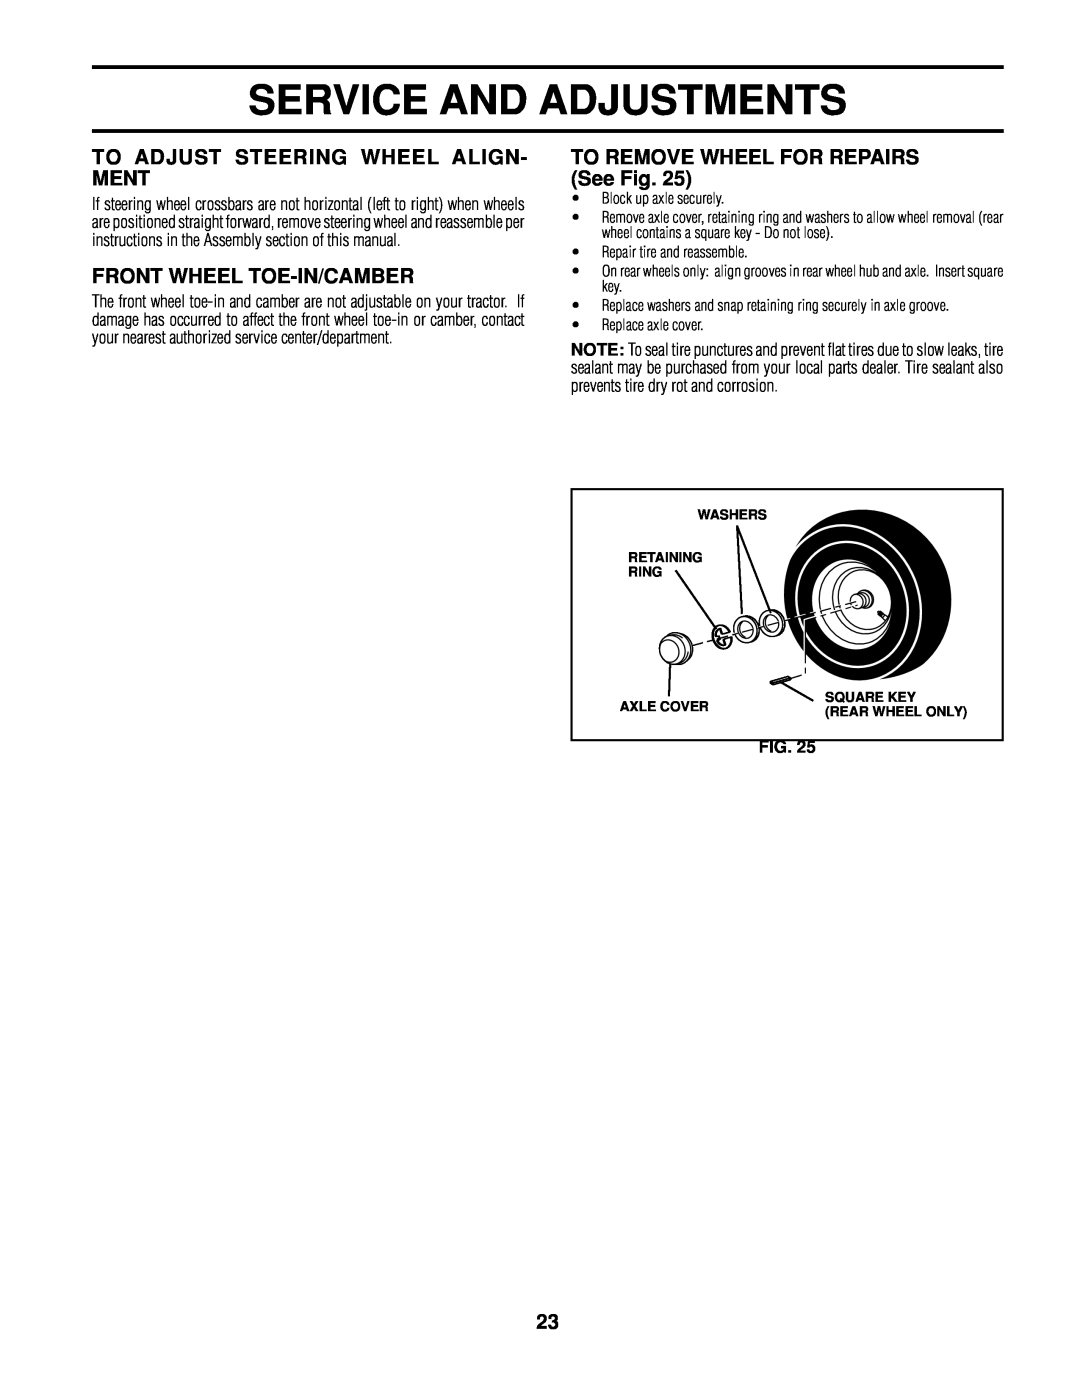 Poulan 161608 Service And Adjustments, To Adjust Steering Wheel Align- Ment, Front Wheel Toe-In/Camber, Replace axle cover 